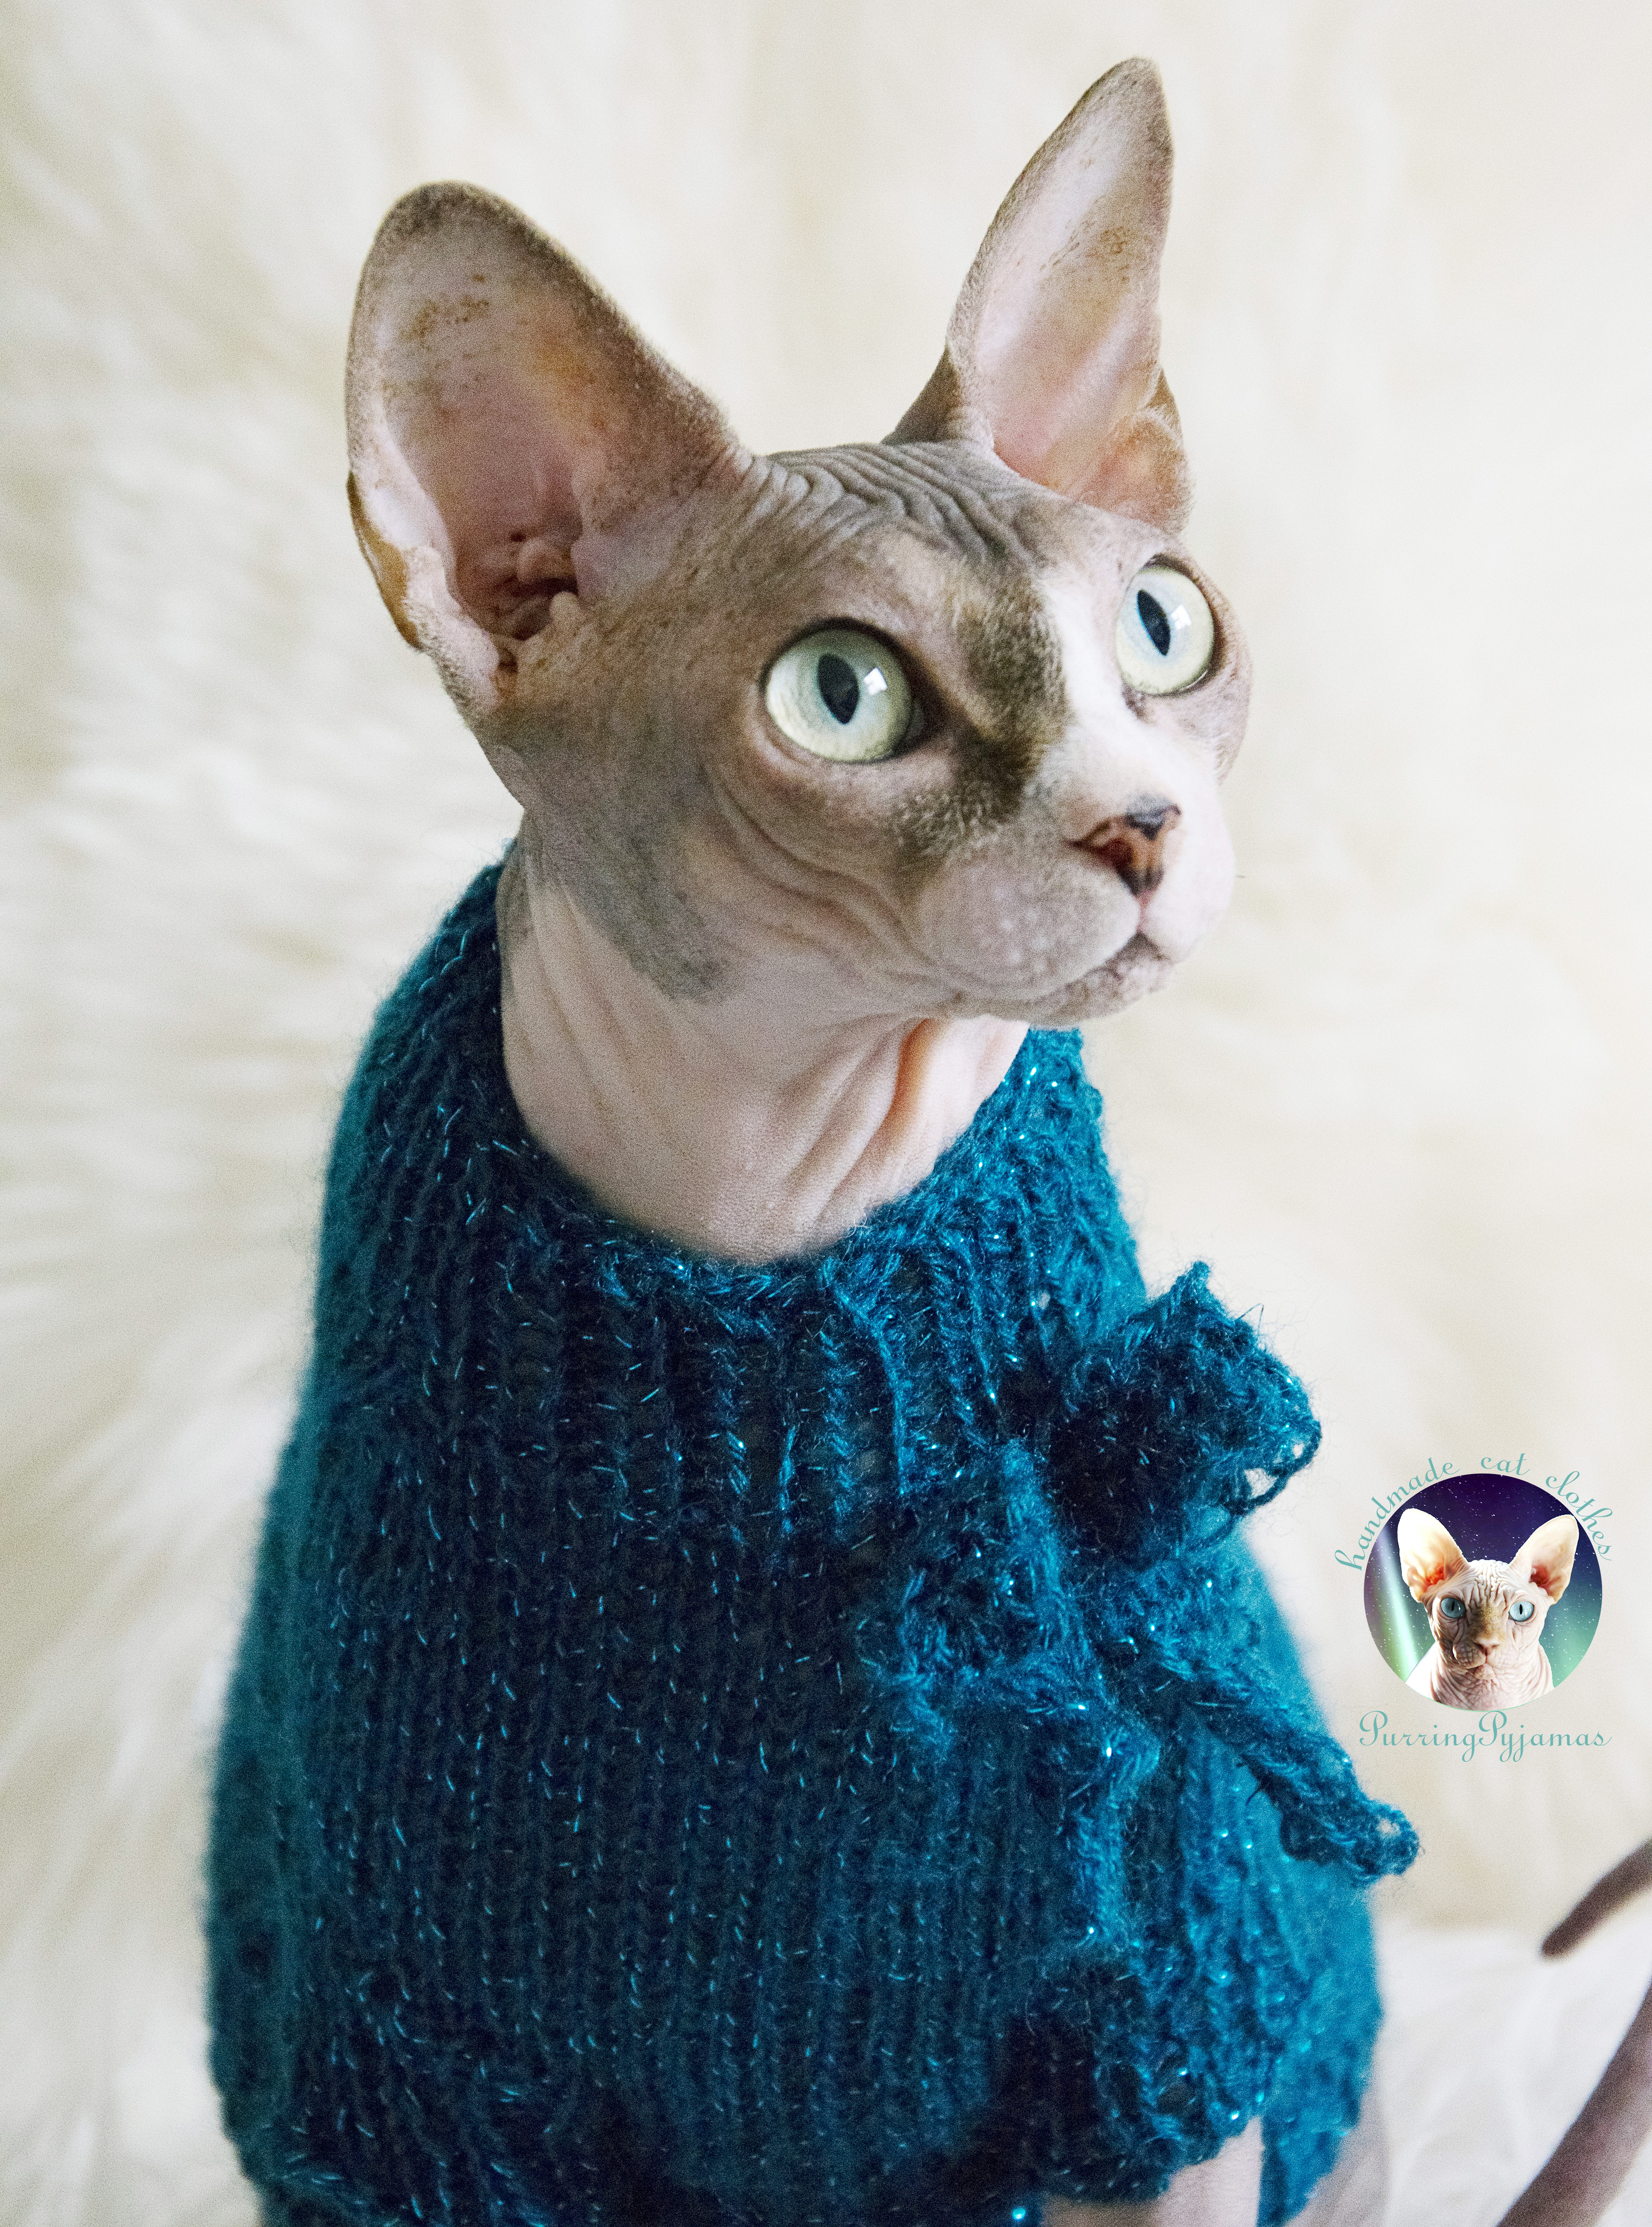 New Sweaters In PurringPyjamas Shop + Aether's Debut As A Model